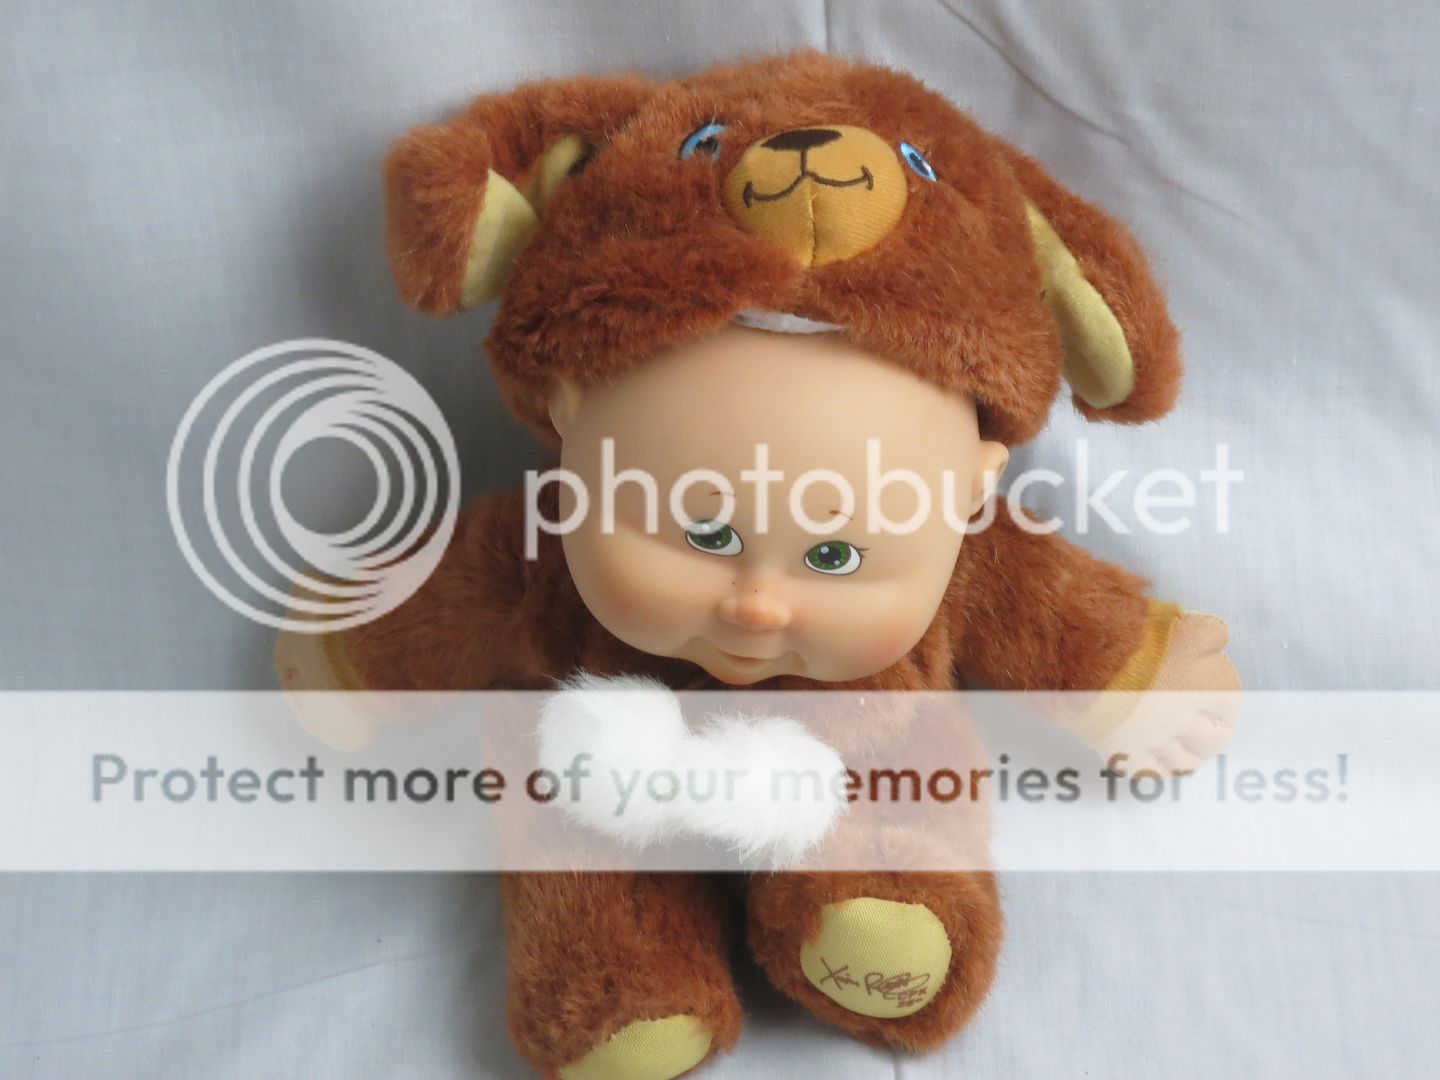 2008 CABBAGE PATCH KIDS BROWN TEDDY 